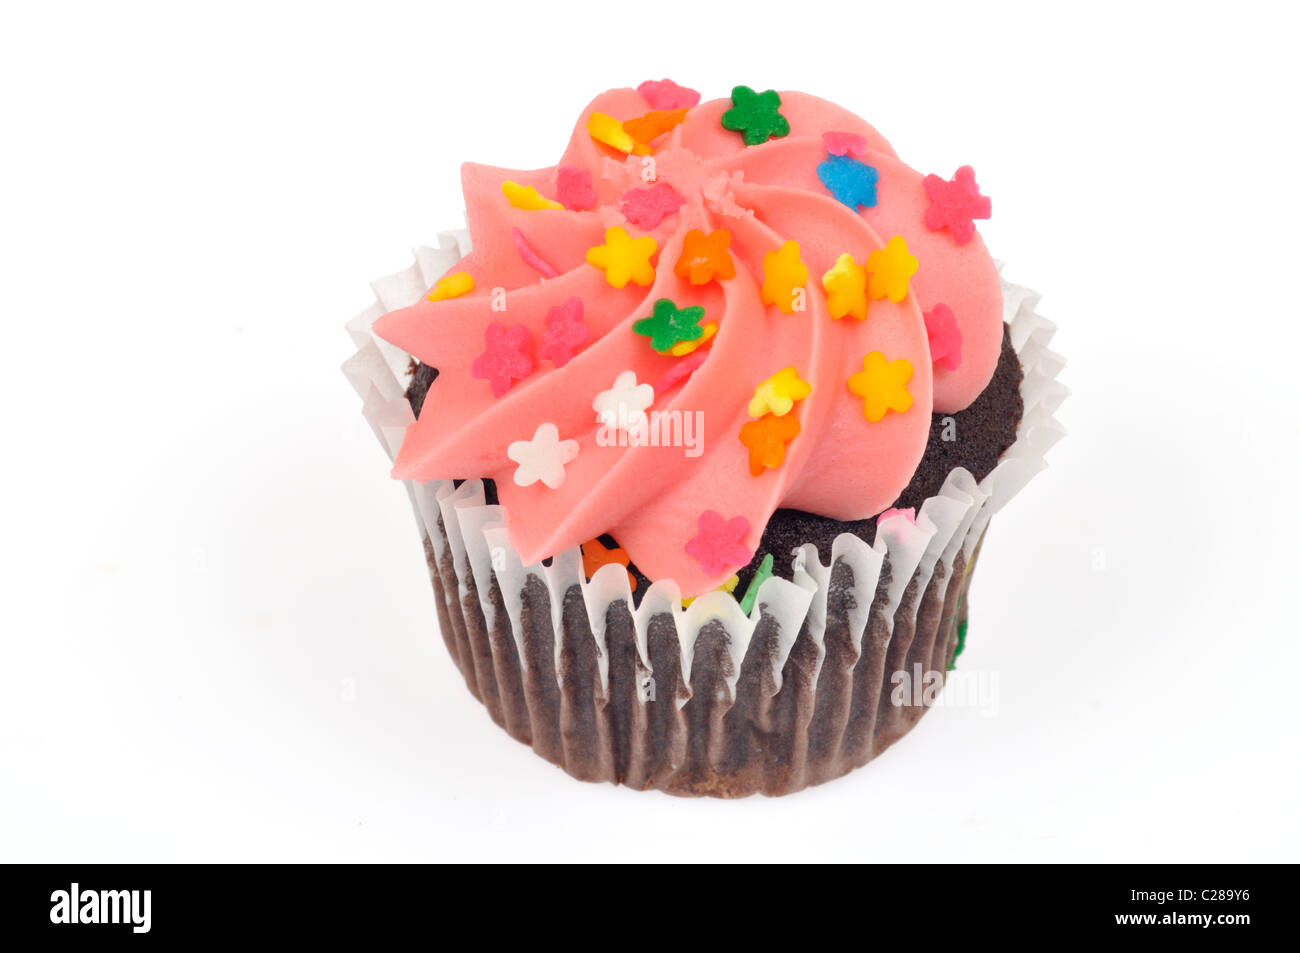 Chocolate cupcake decorated with pink icing and colorful sprinkles on white background, cutout. Stock Photo